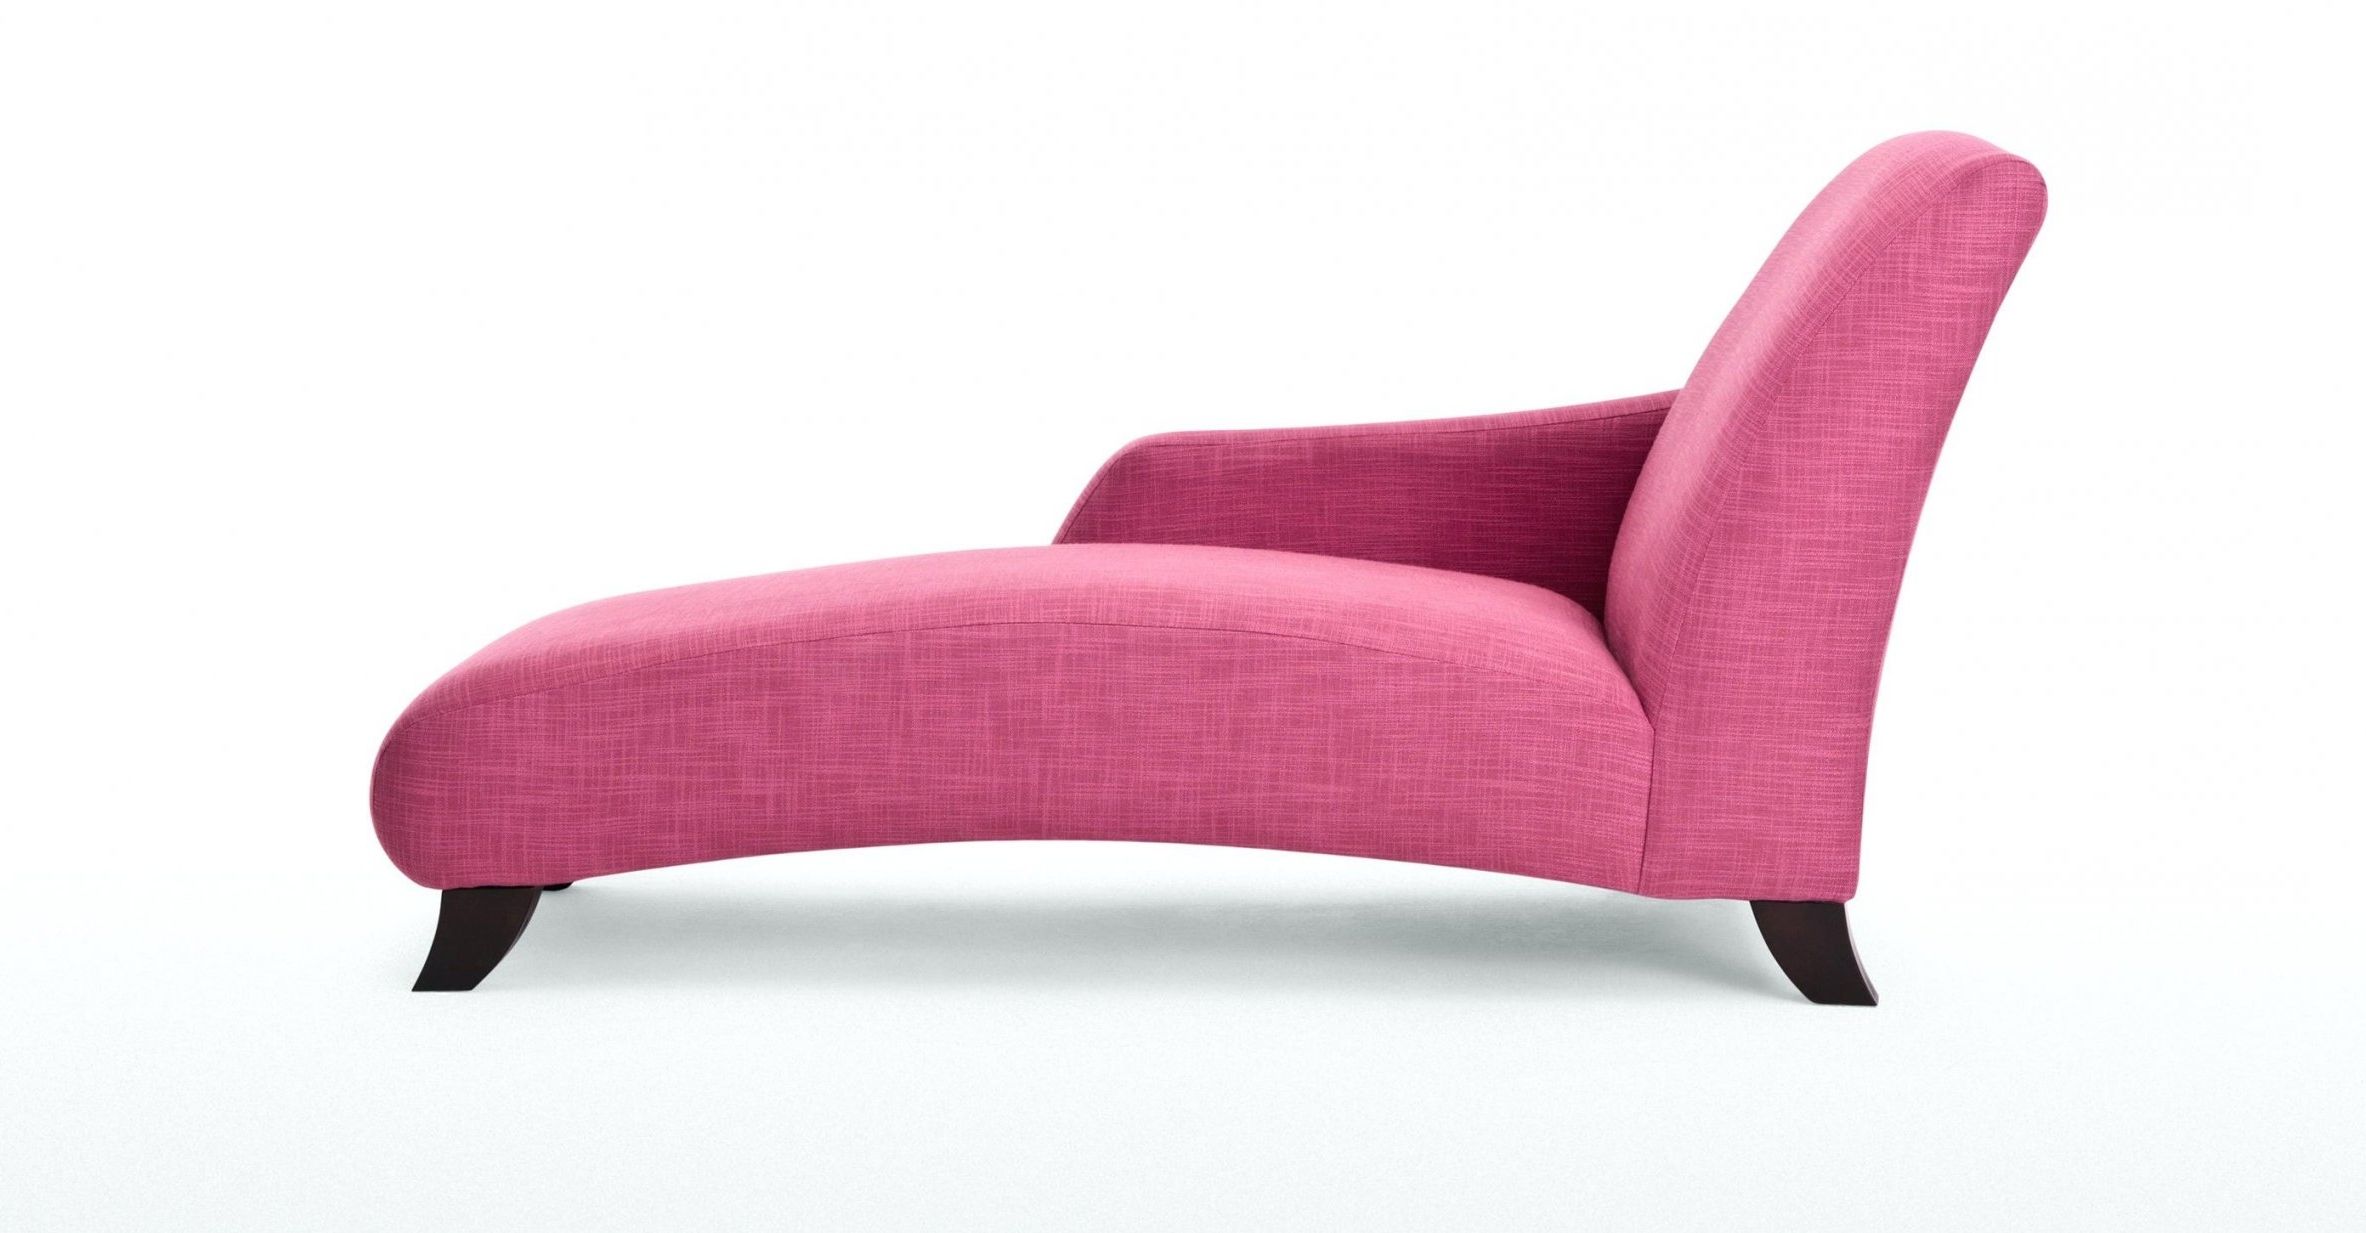 Hot Pink Chaise Lounge Chairs For Well Liked Pink Chaise Lounge Sofa (View 3 of 15)